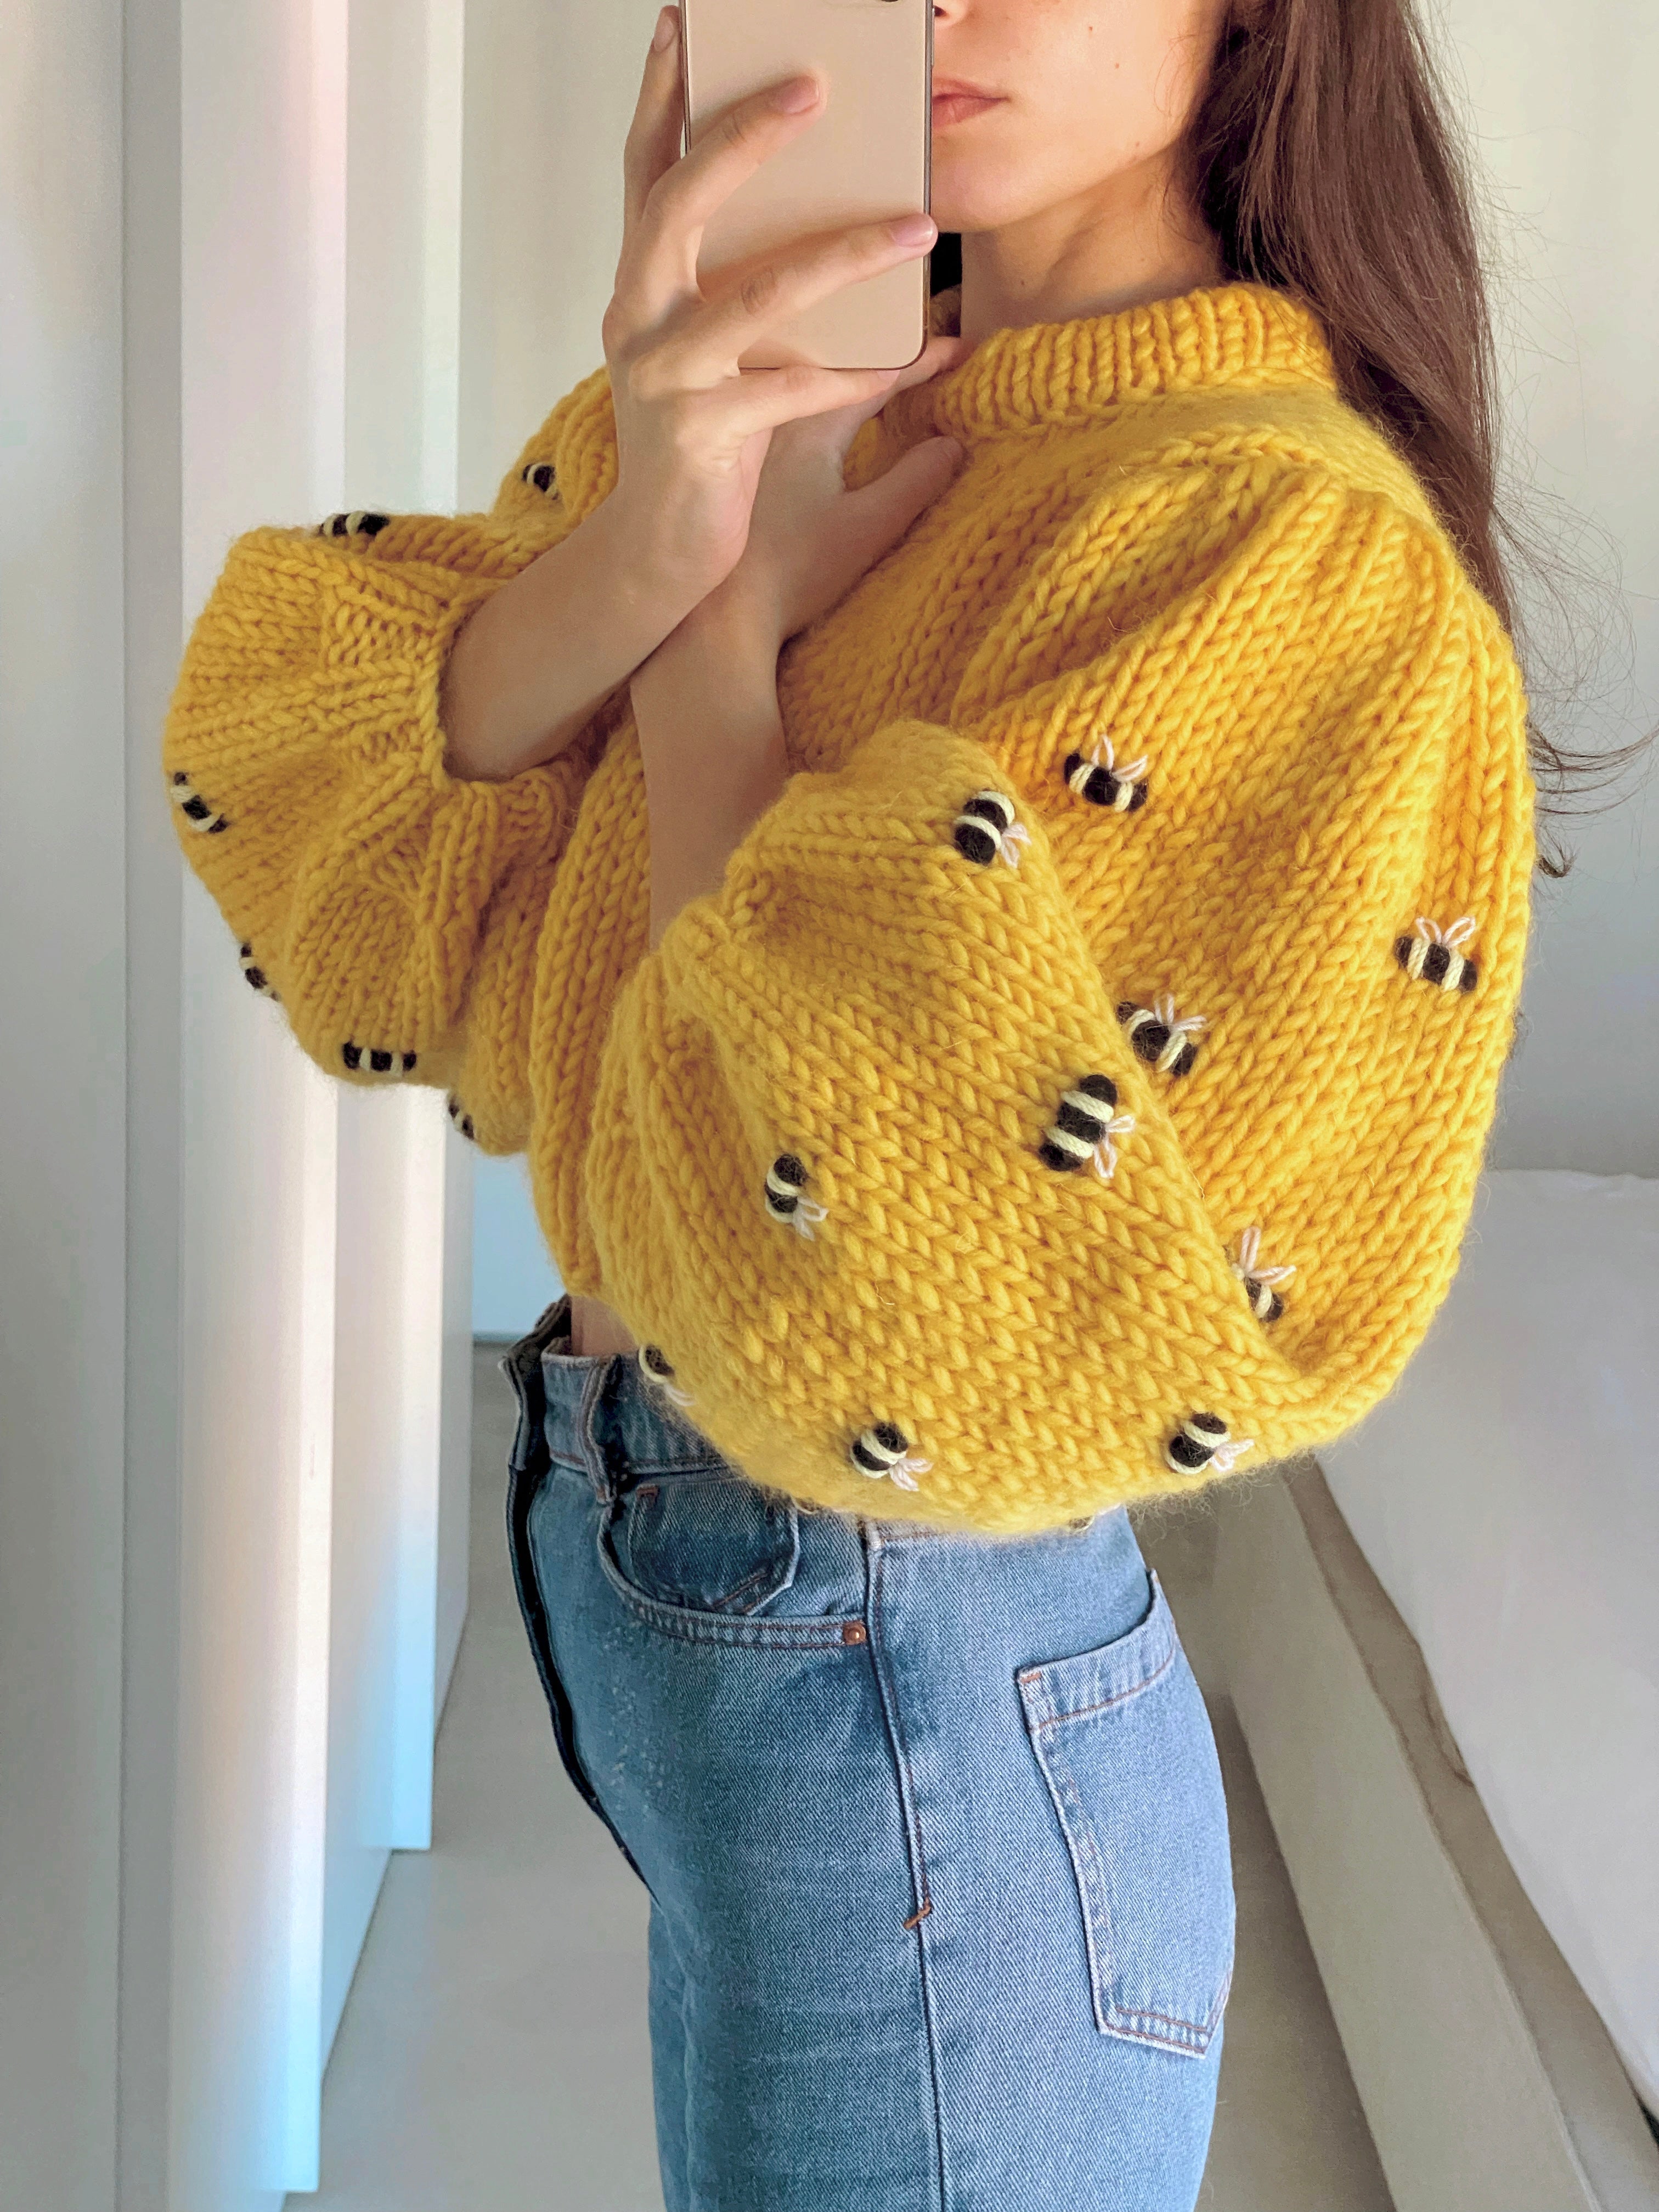 Save The Bees hand-knitted sweater